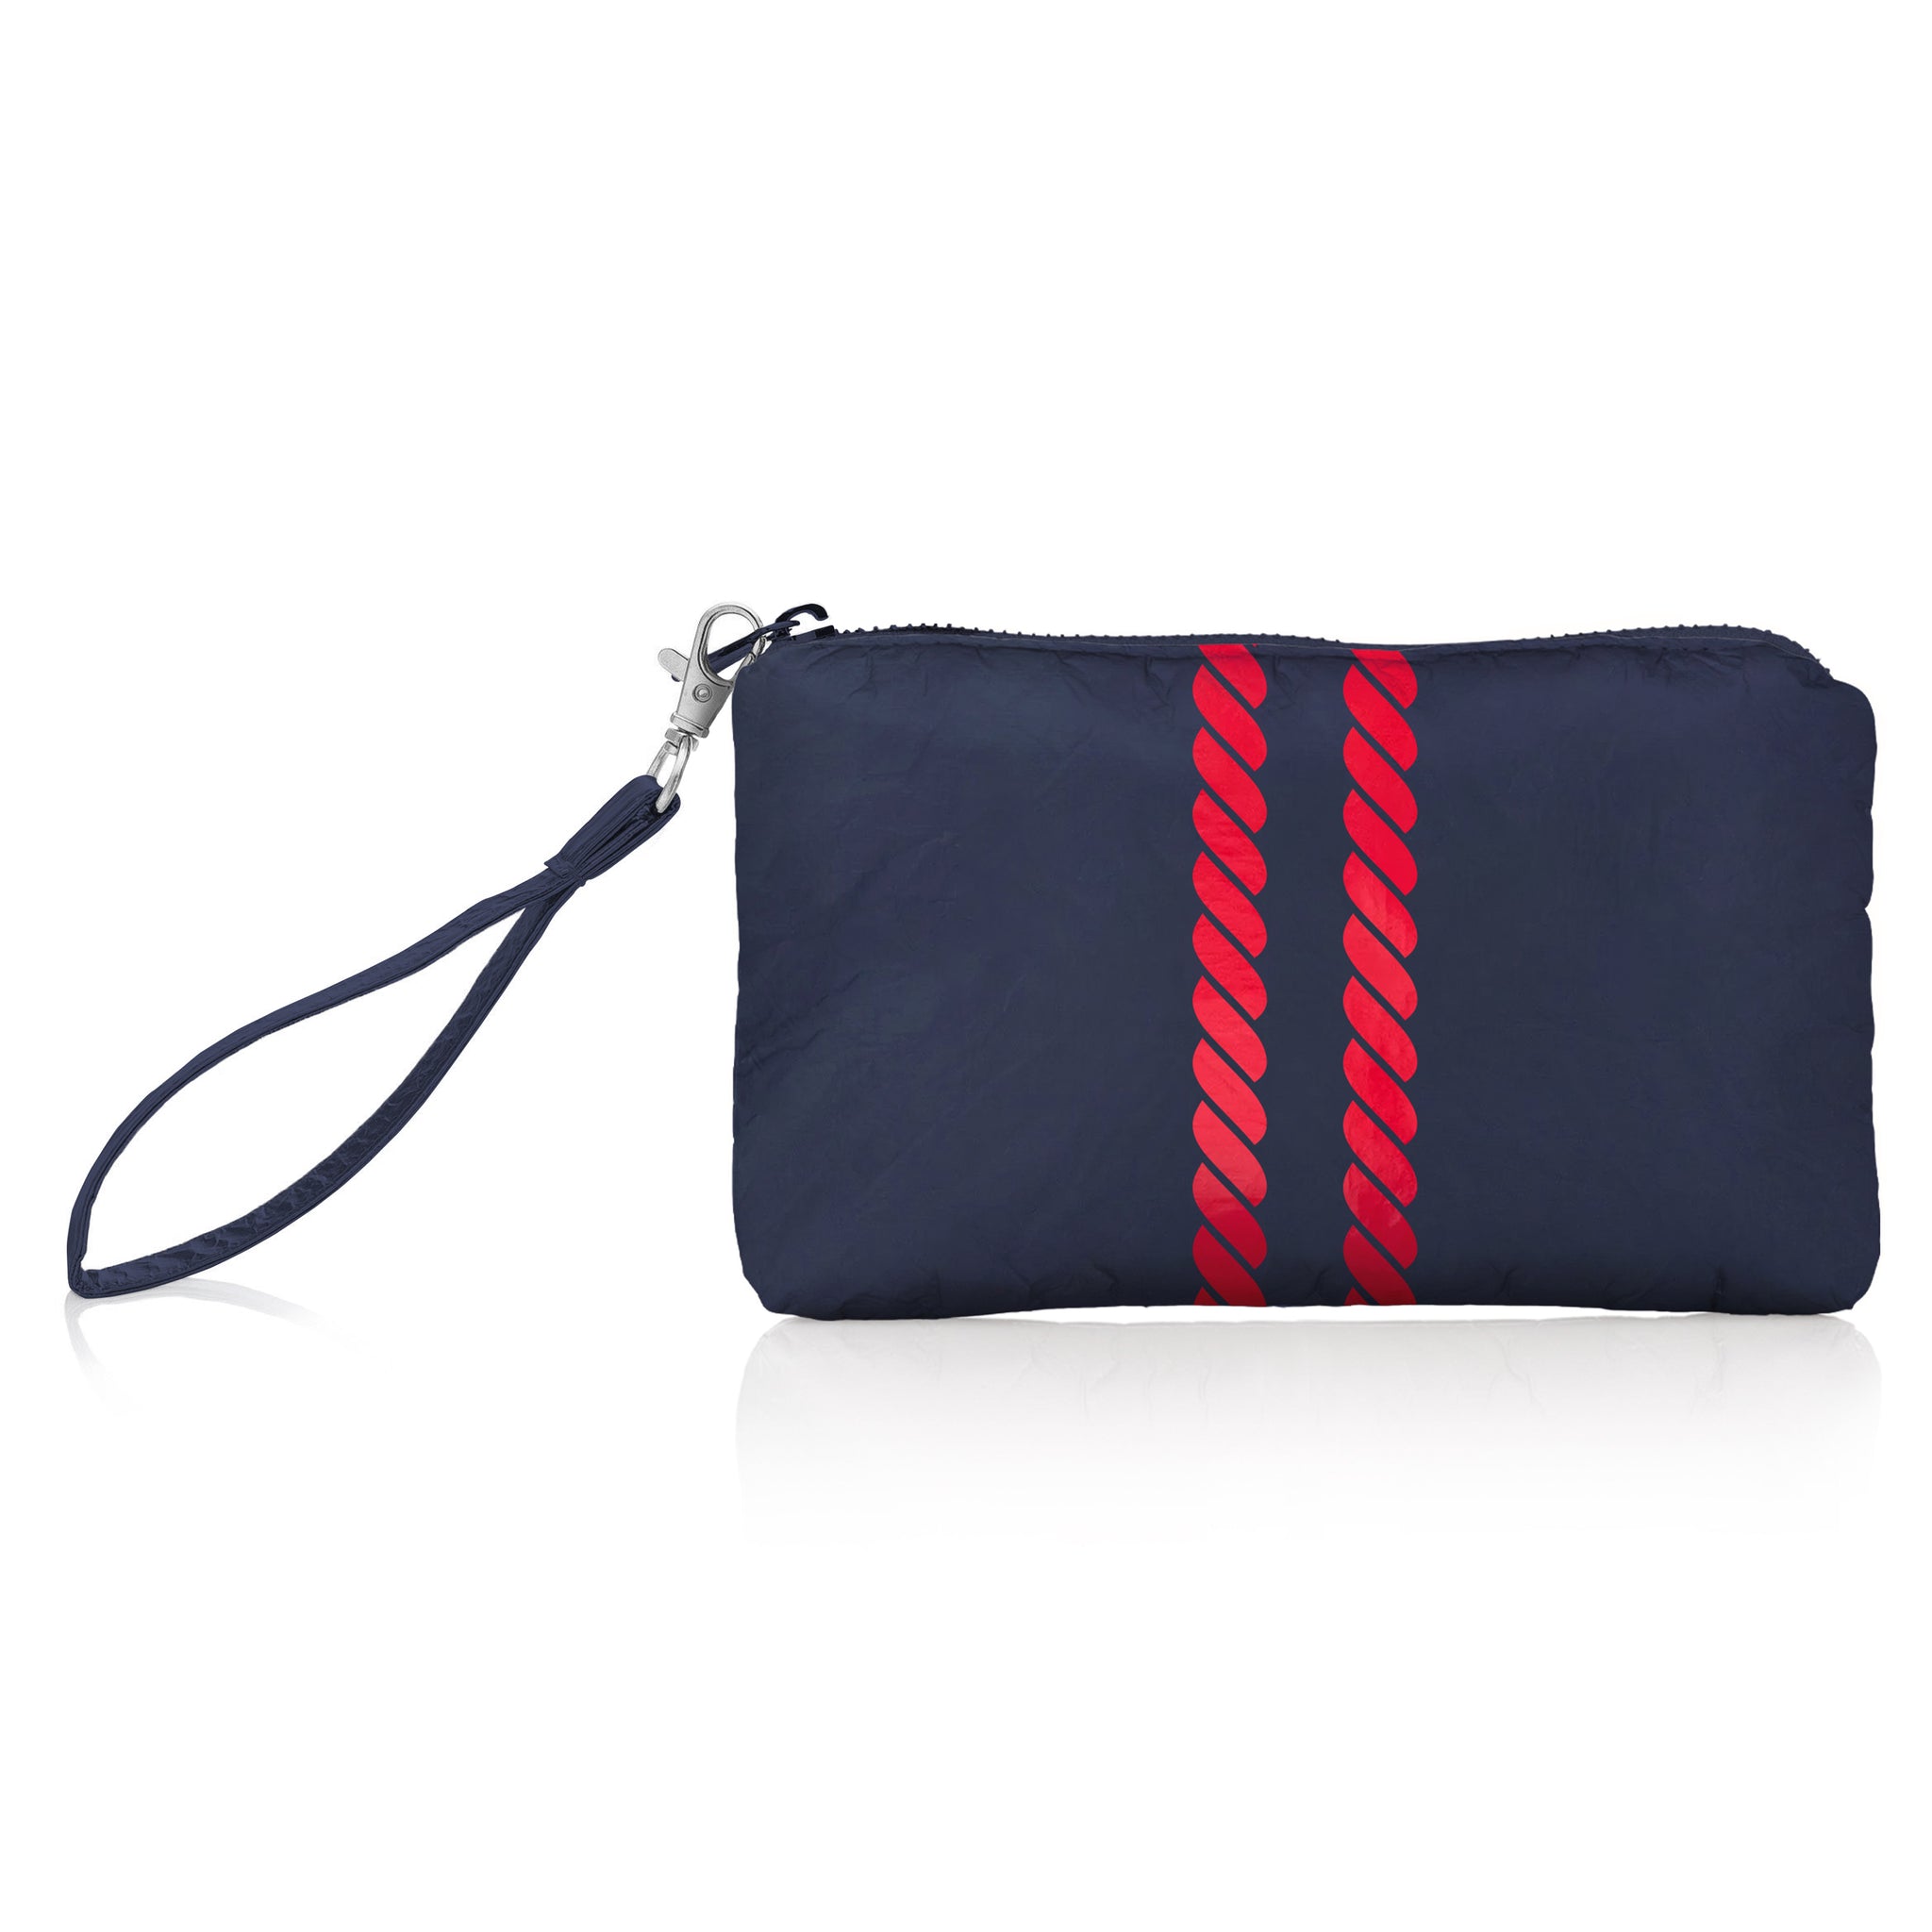 nautical navy blue zipper wristlet with red stripes